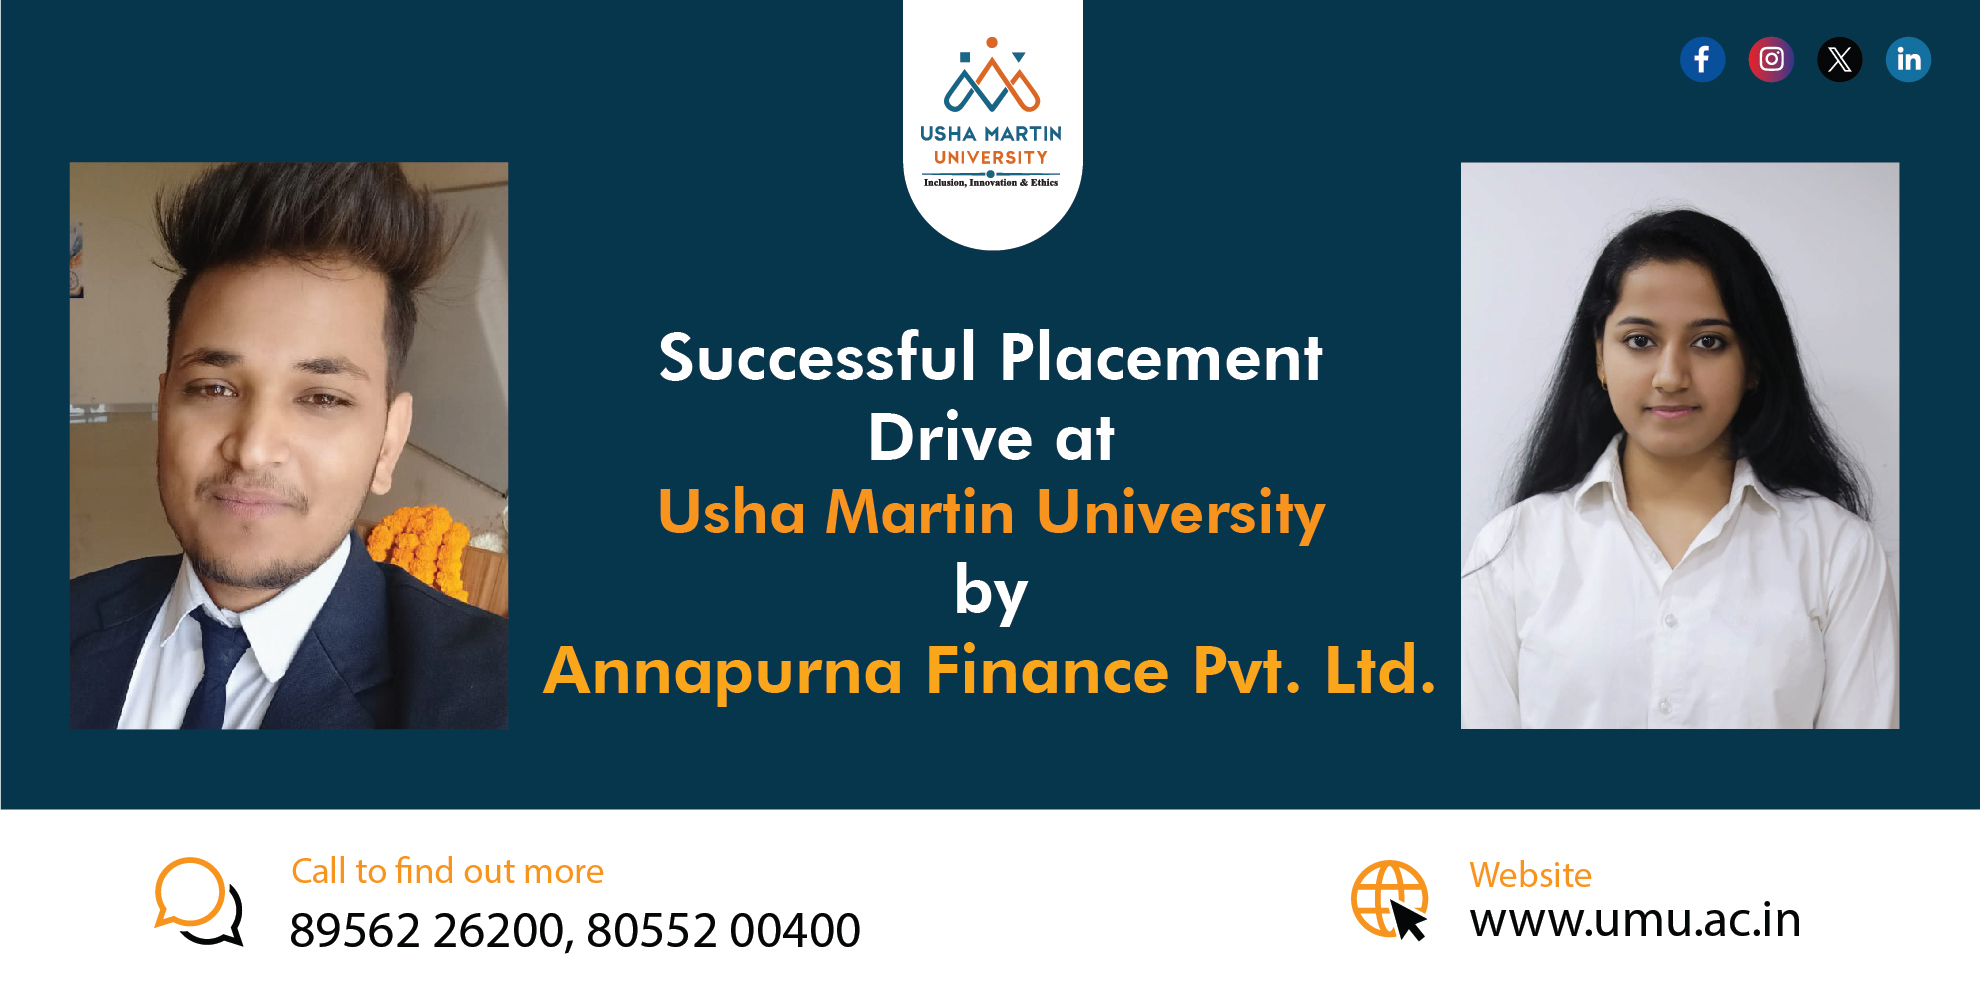 Successful Placement Drive at Usha Martin University by Annapurna Finance Private Limited